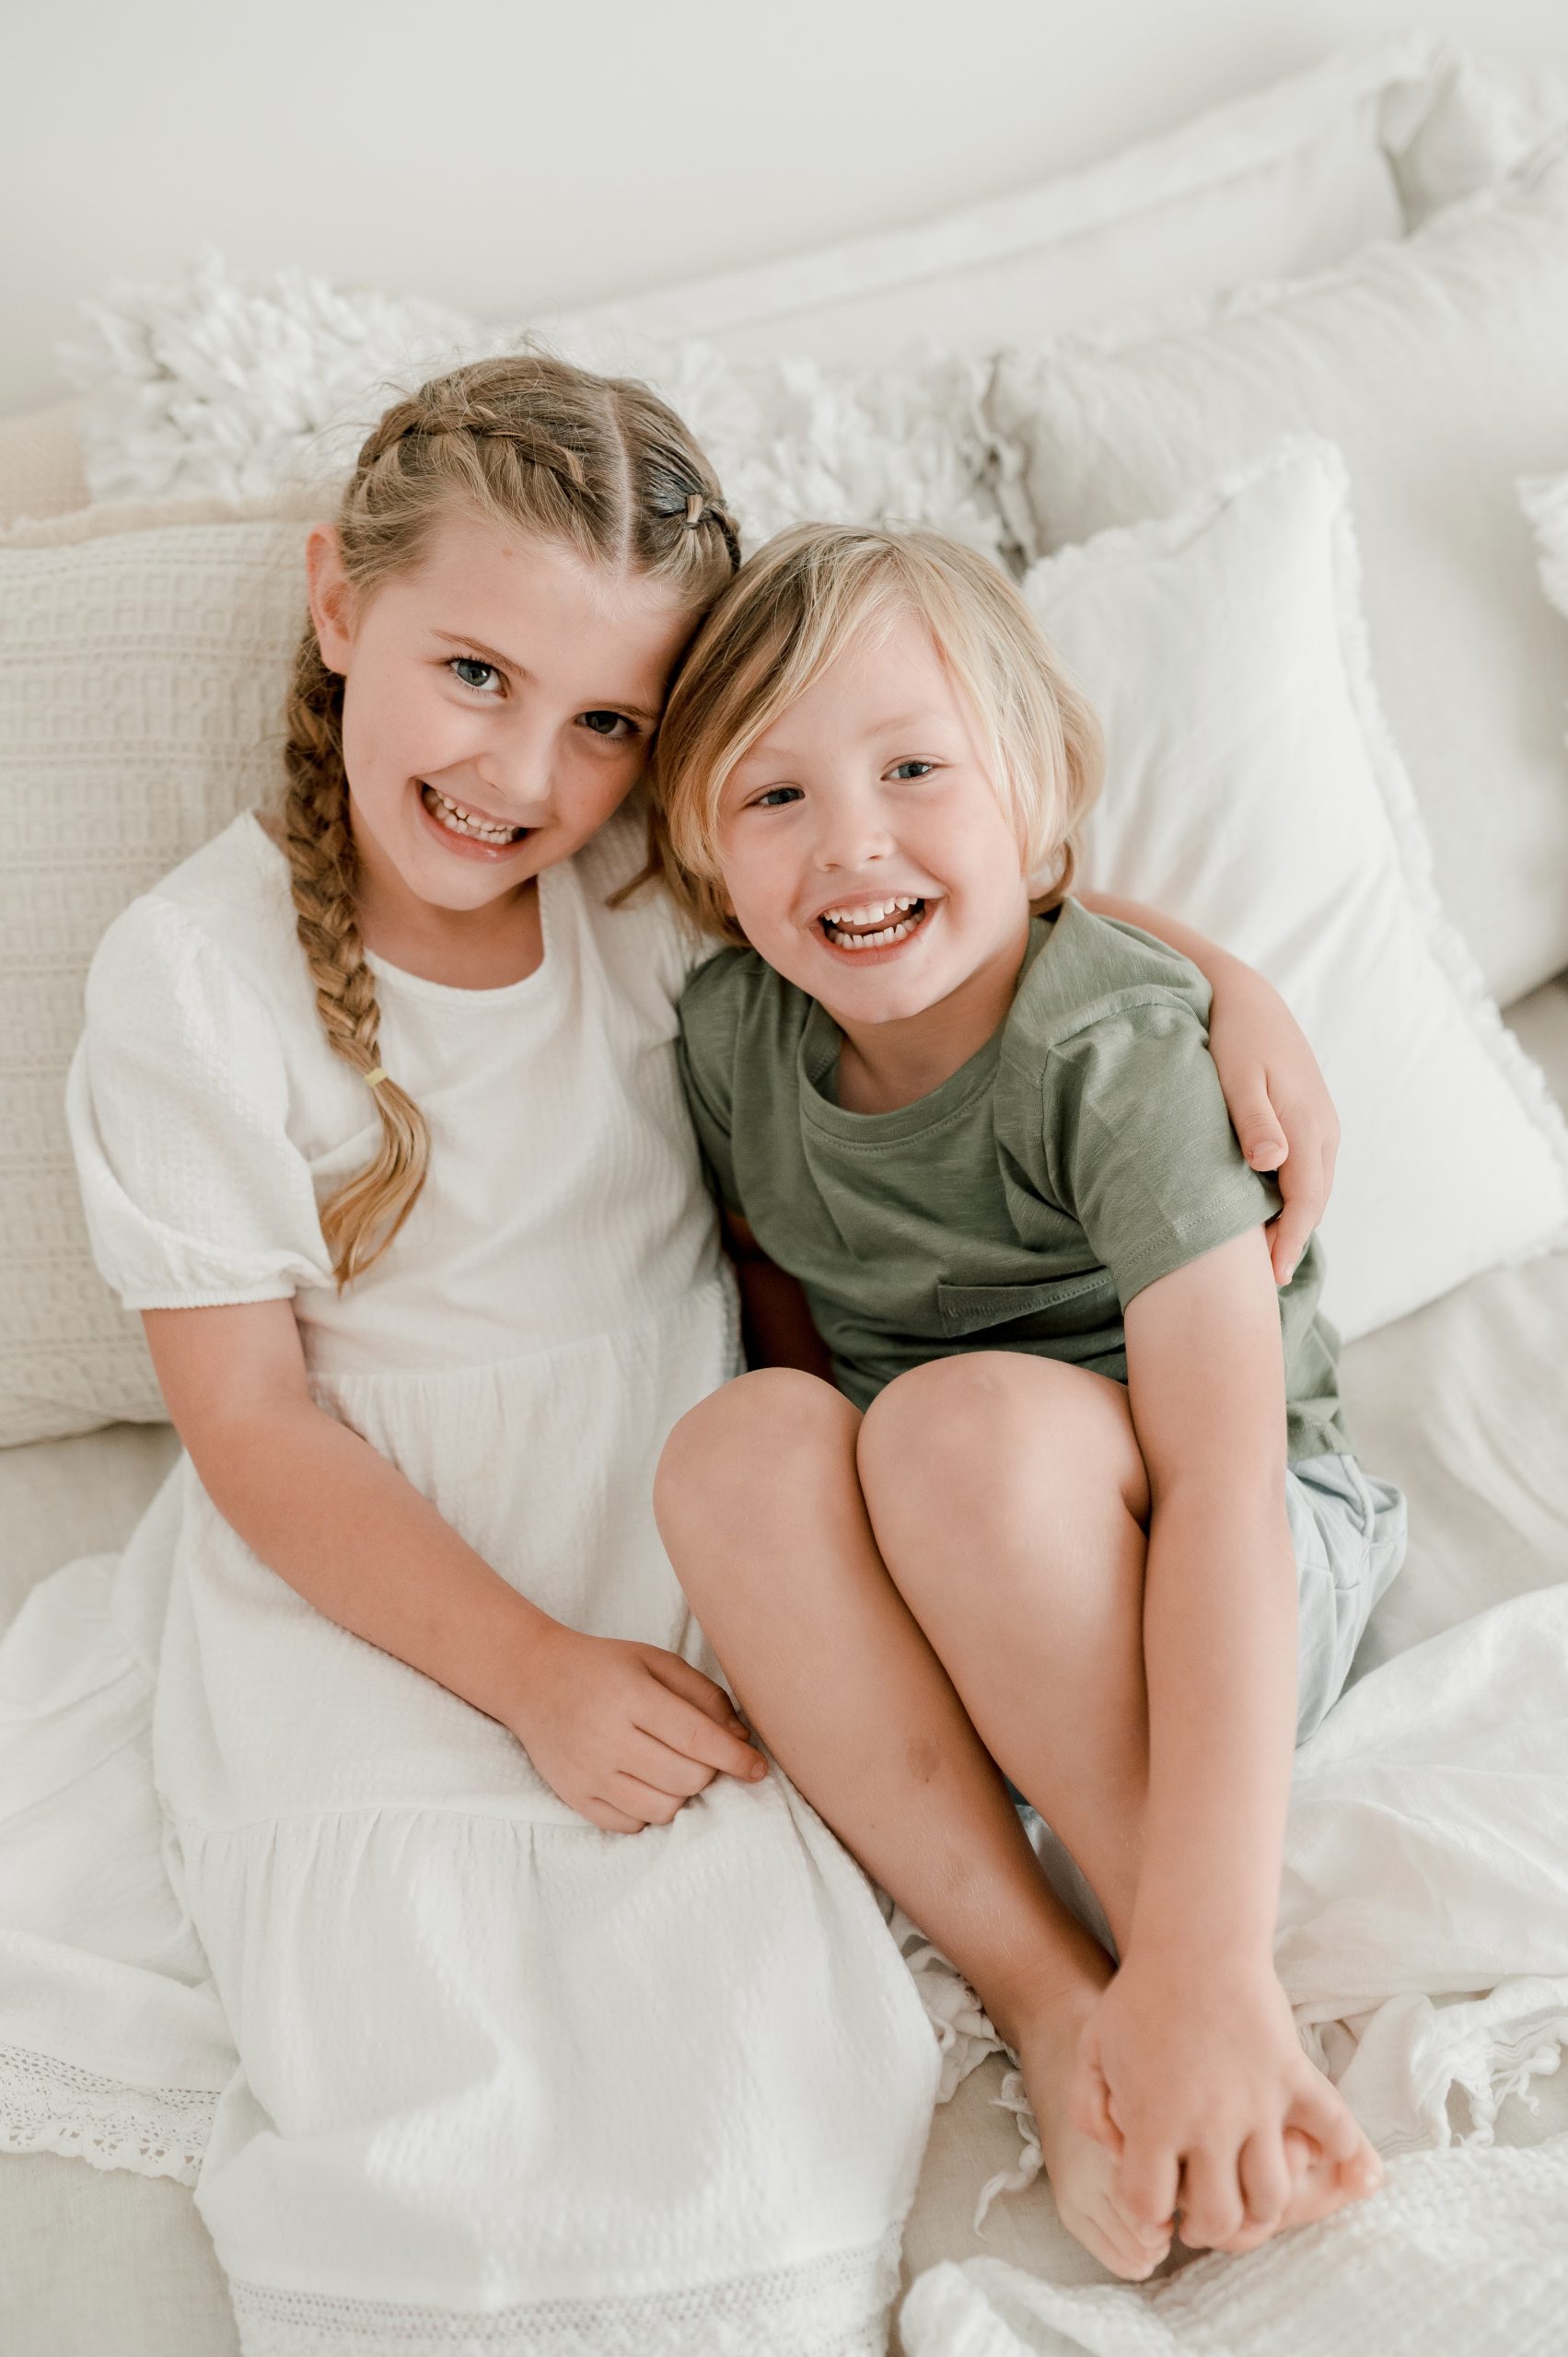 The lovely Jake & Freya are photographed in Kate & Co's natural light studio in Edwardstown, South Australia. They wear neutral colours and are laying back in soft cusions on a white linen bed. Their big beautiful smiles look straight up to camera.